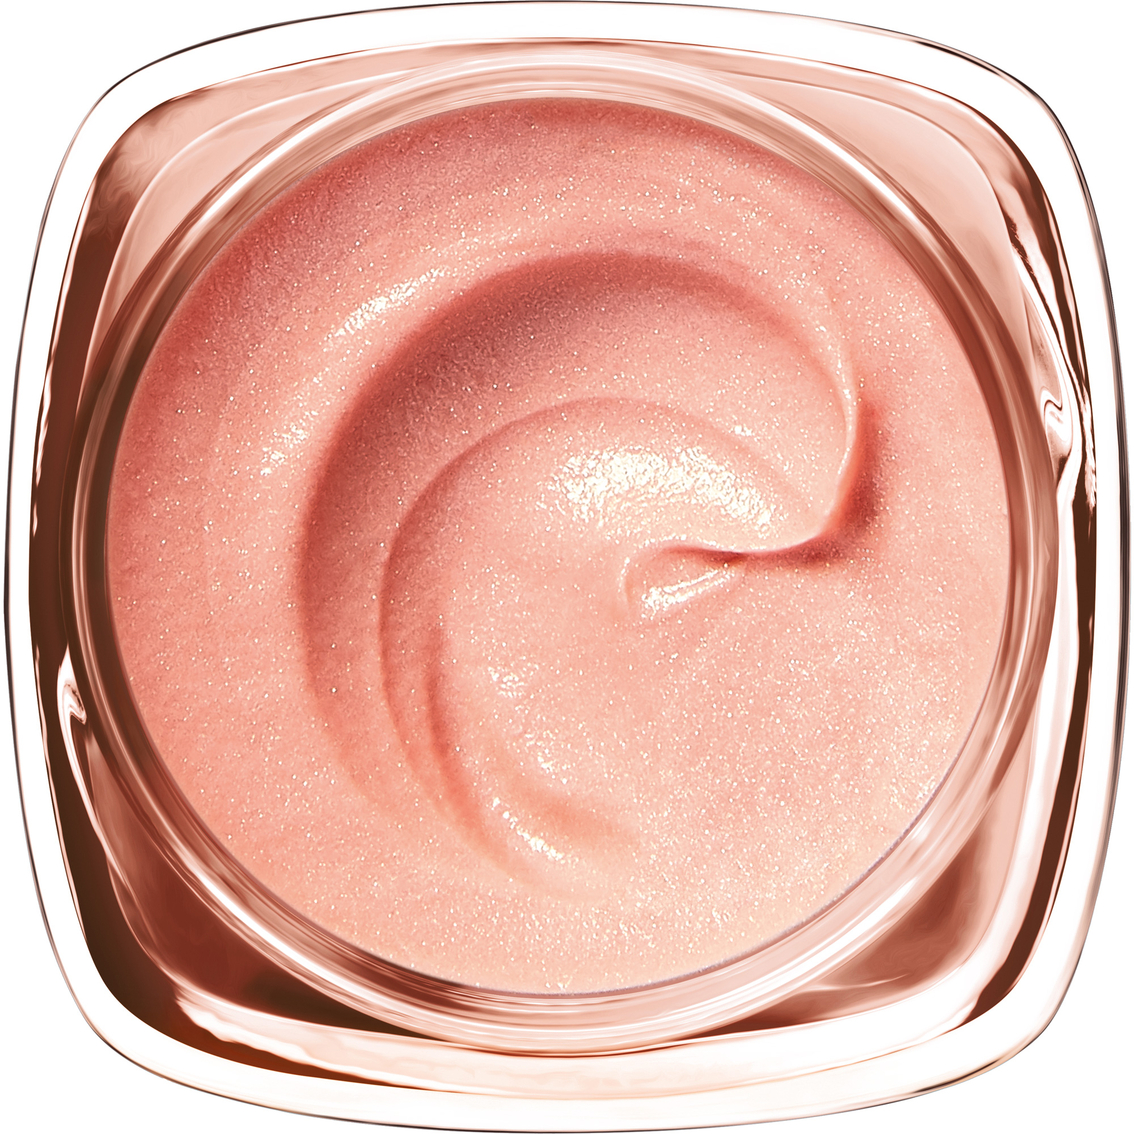 L'Oreal Age Perfect Rosy Tone Anti Aging Eye Brightener - Image 7 of 10